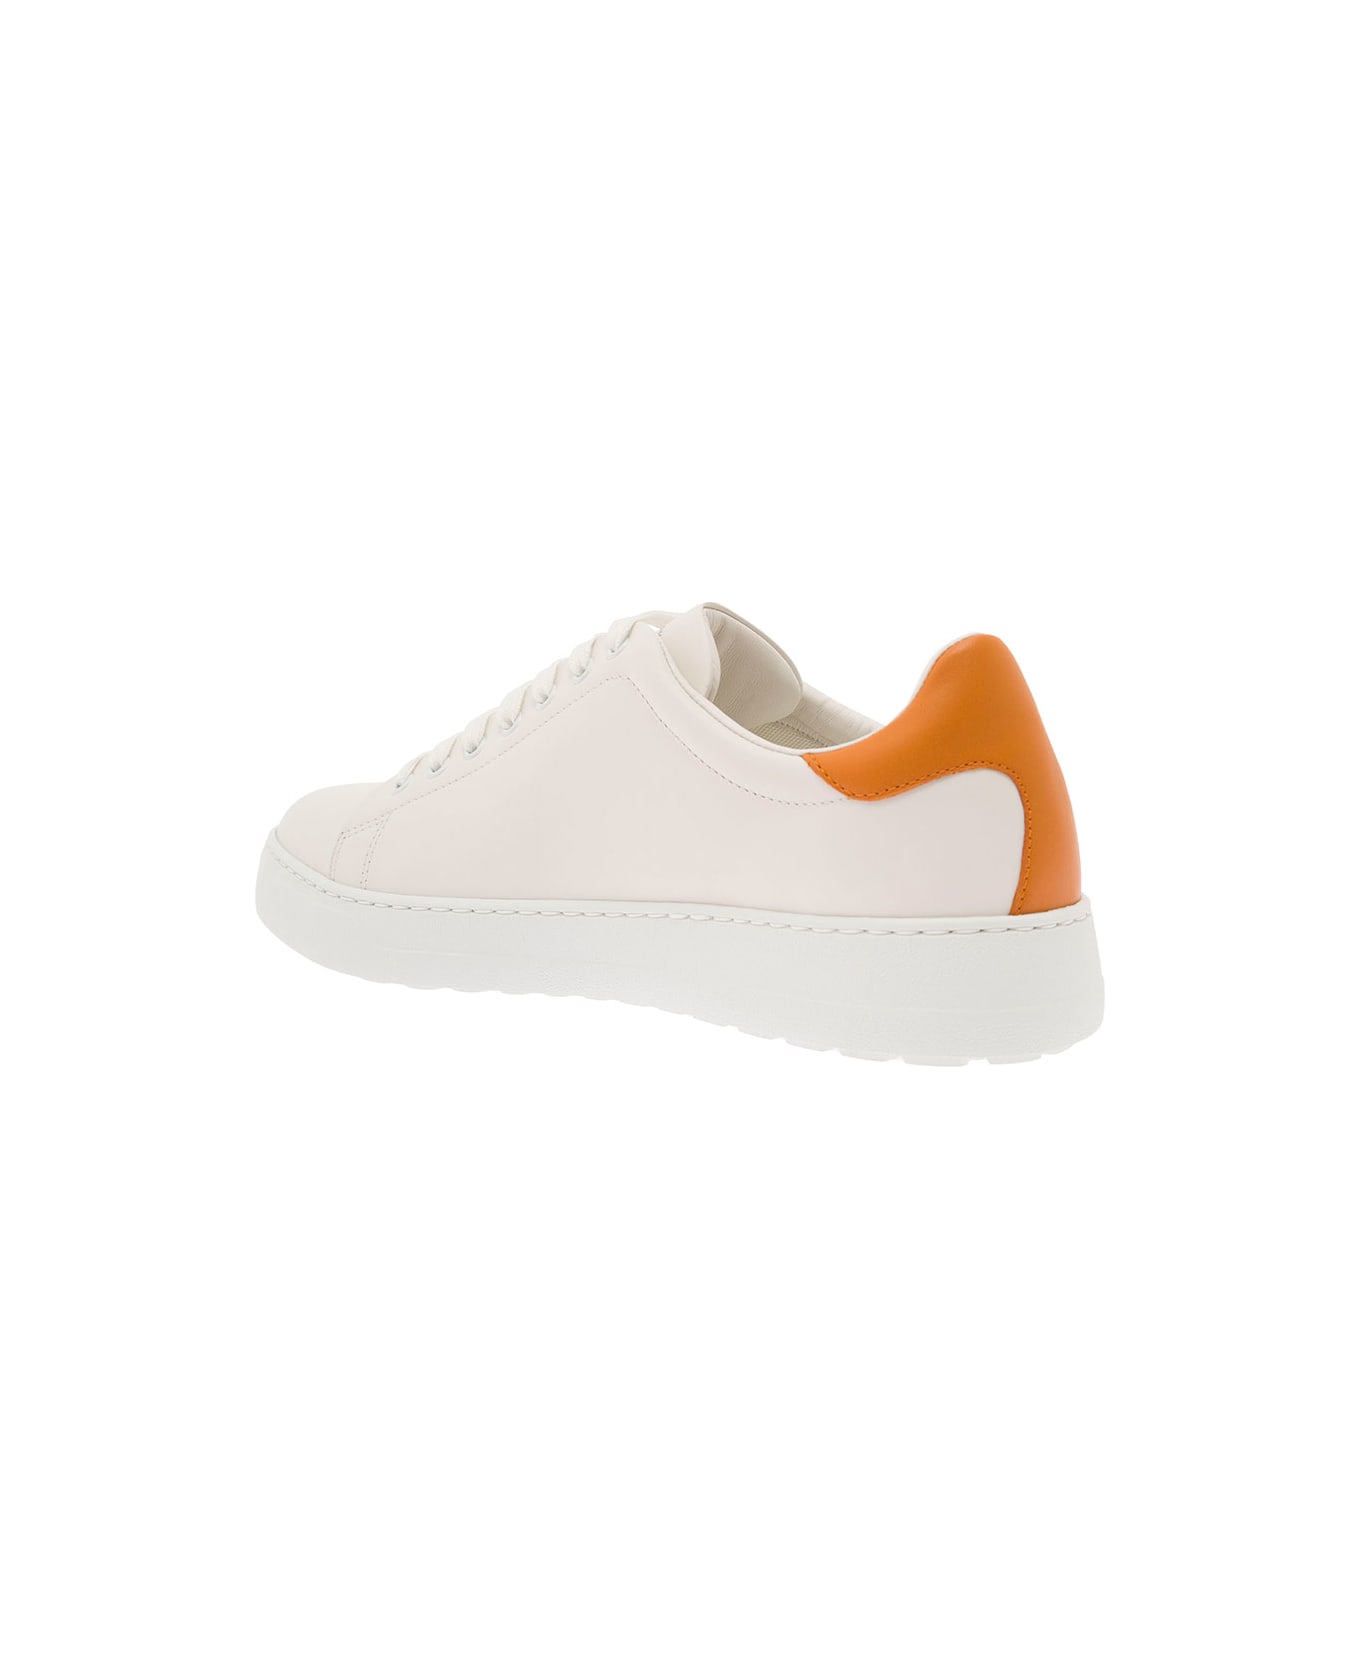 Ferragamo White Low Top Sneakers With Gancini Logo Print In Leather Man - White スニーカー